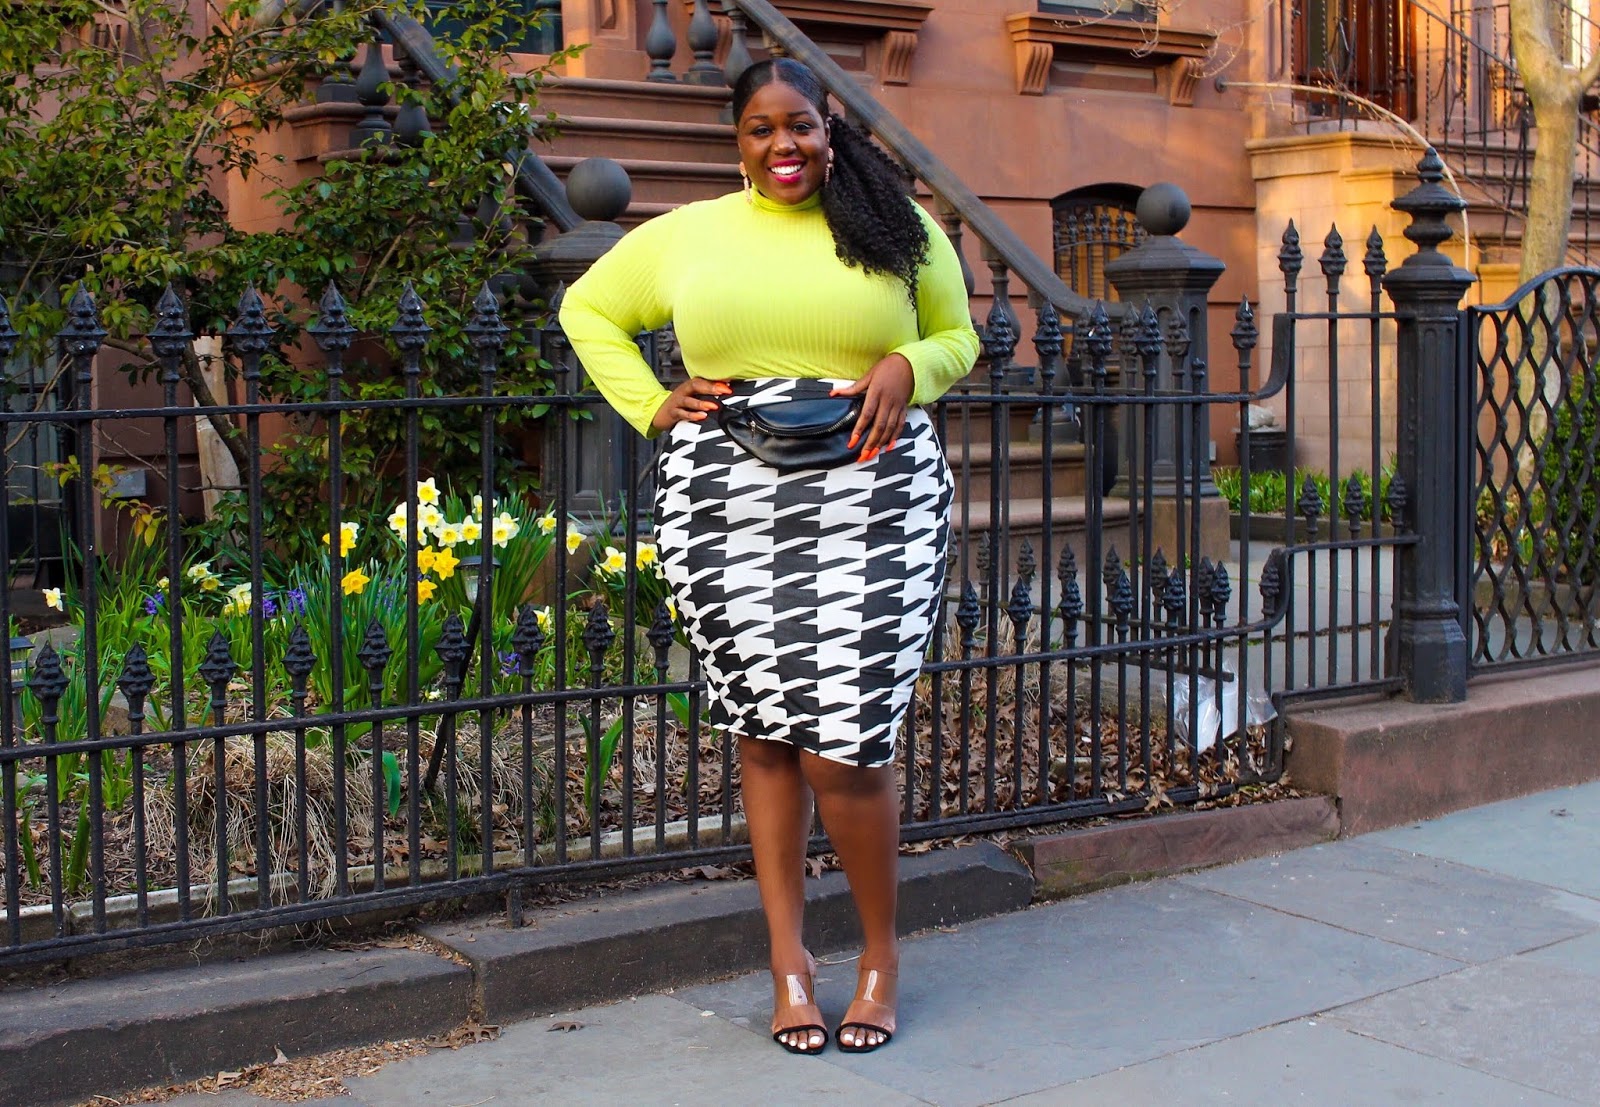 How to look SNATCHED in Body-Hugging Clothes! – On The Q Train